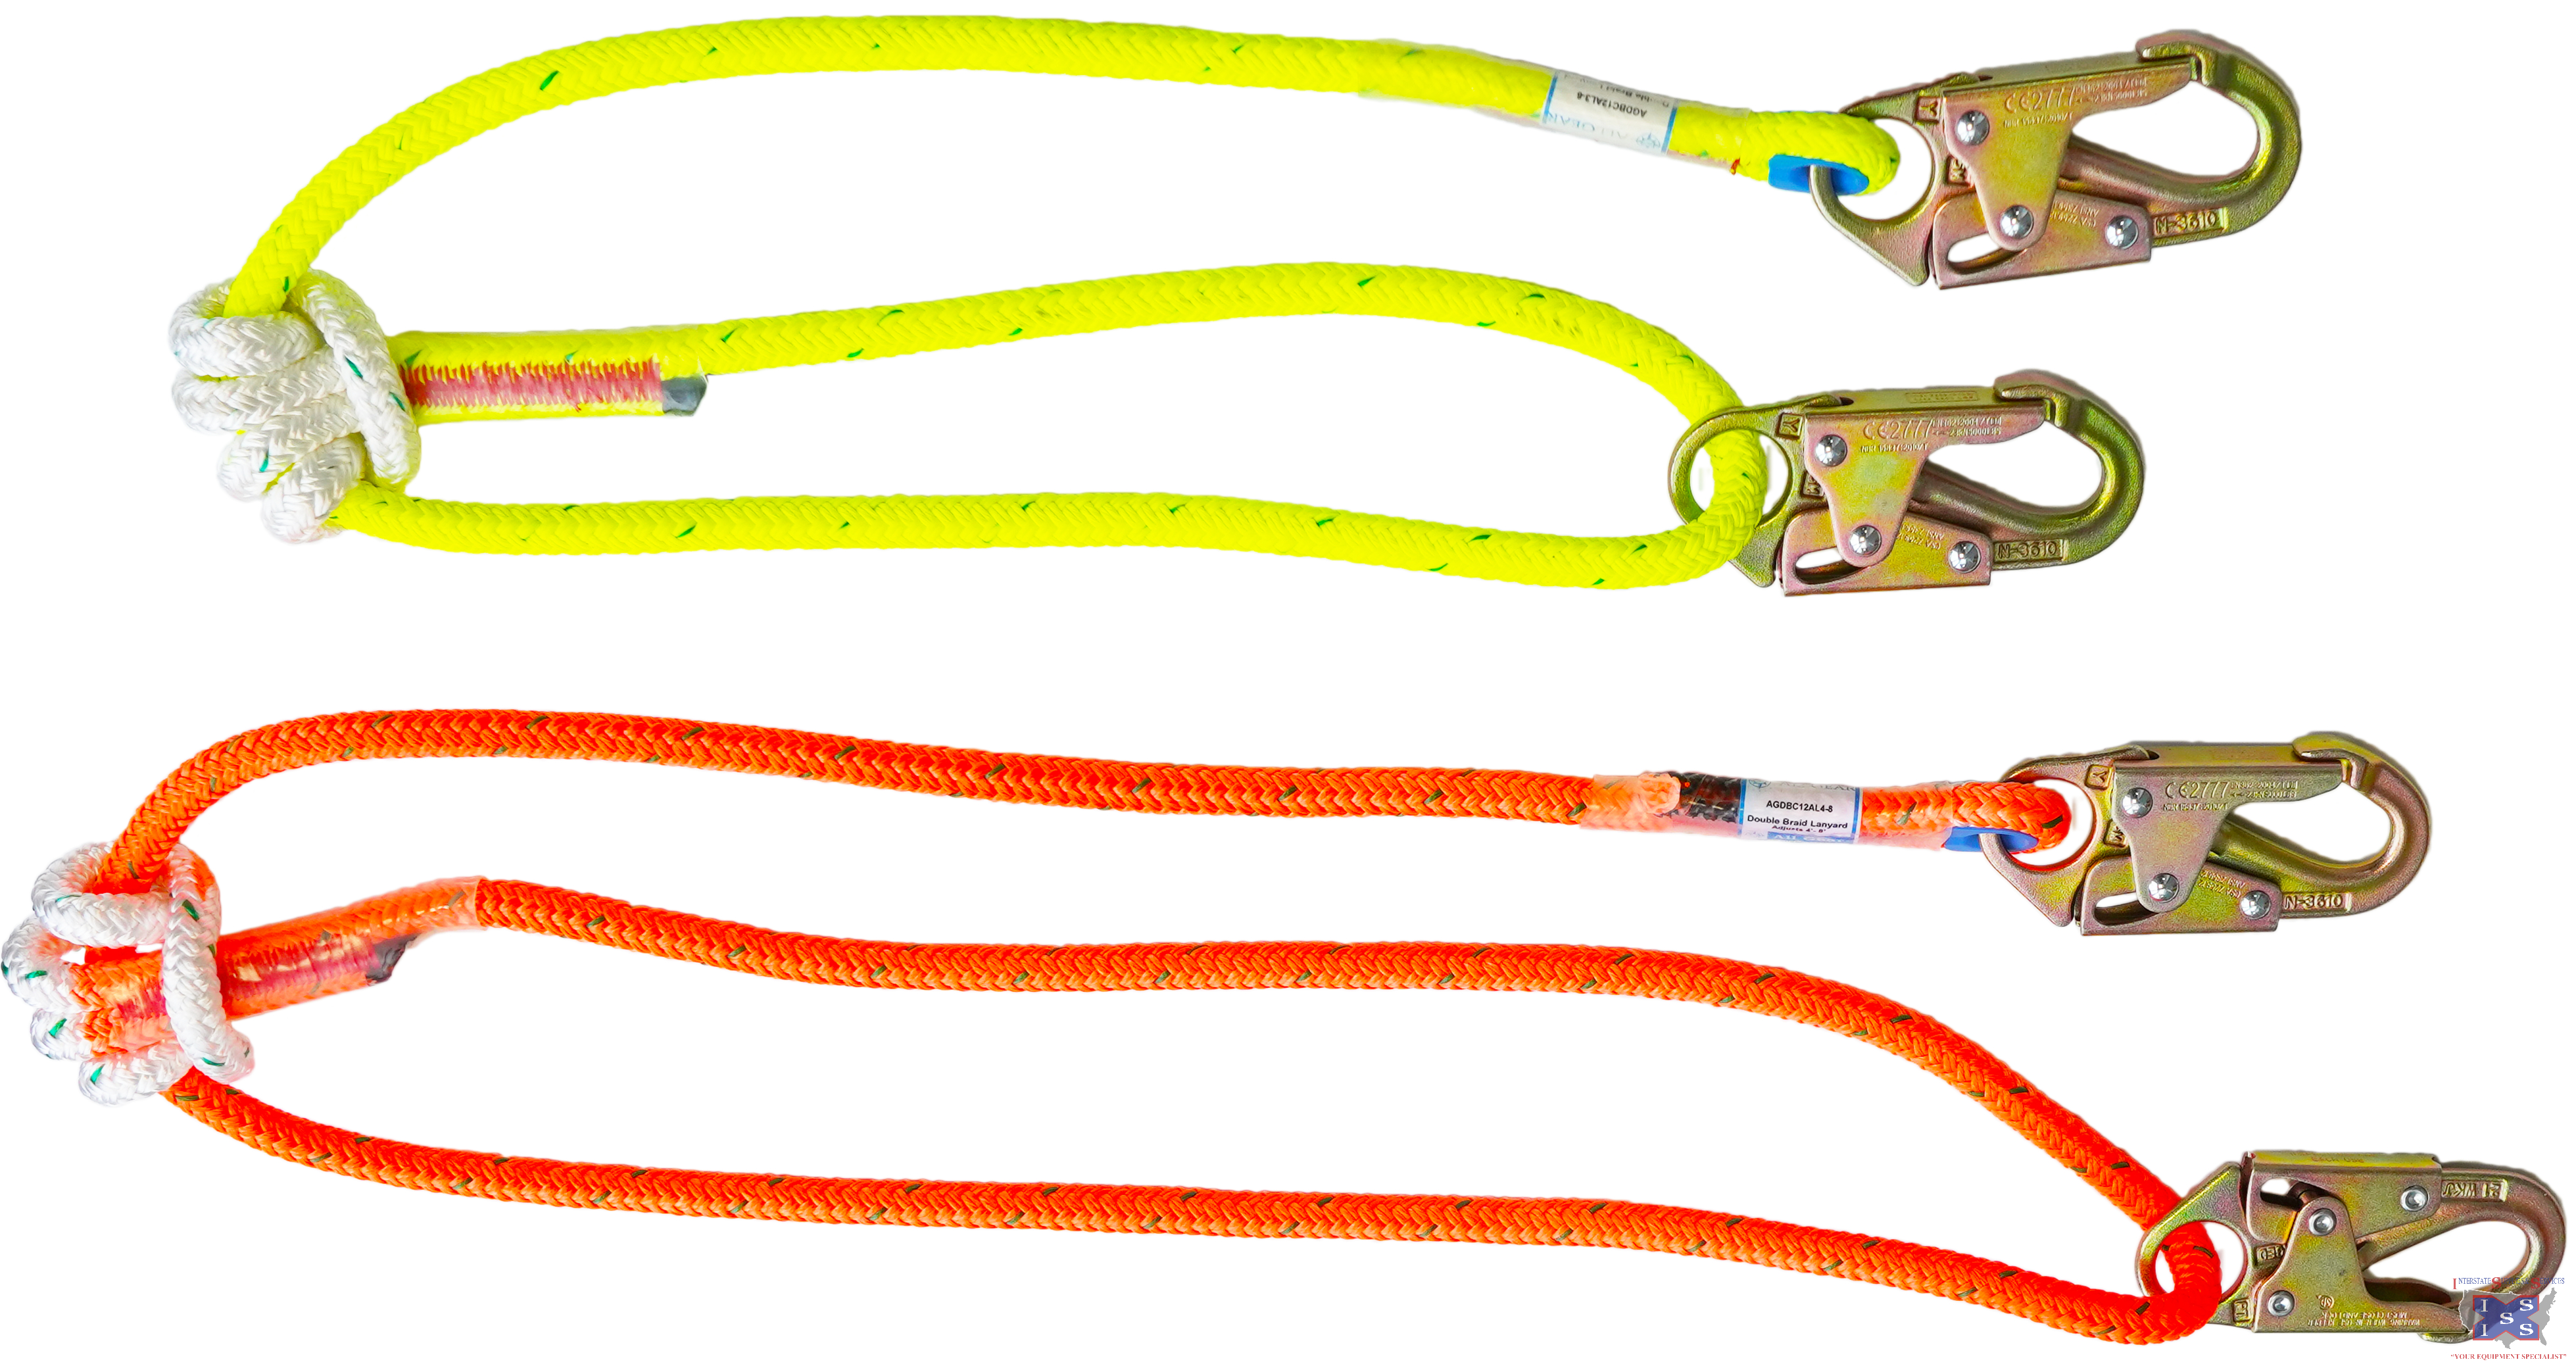 AllGear Double Braid Adjustable Lanyard 1/2" x 3-6' - Click Image to Close